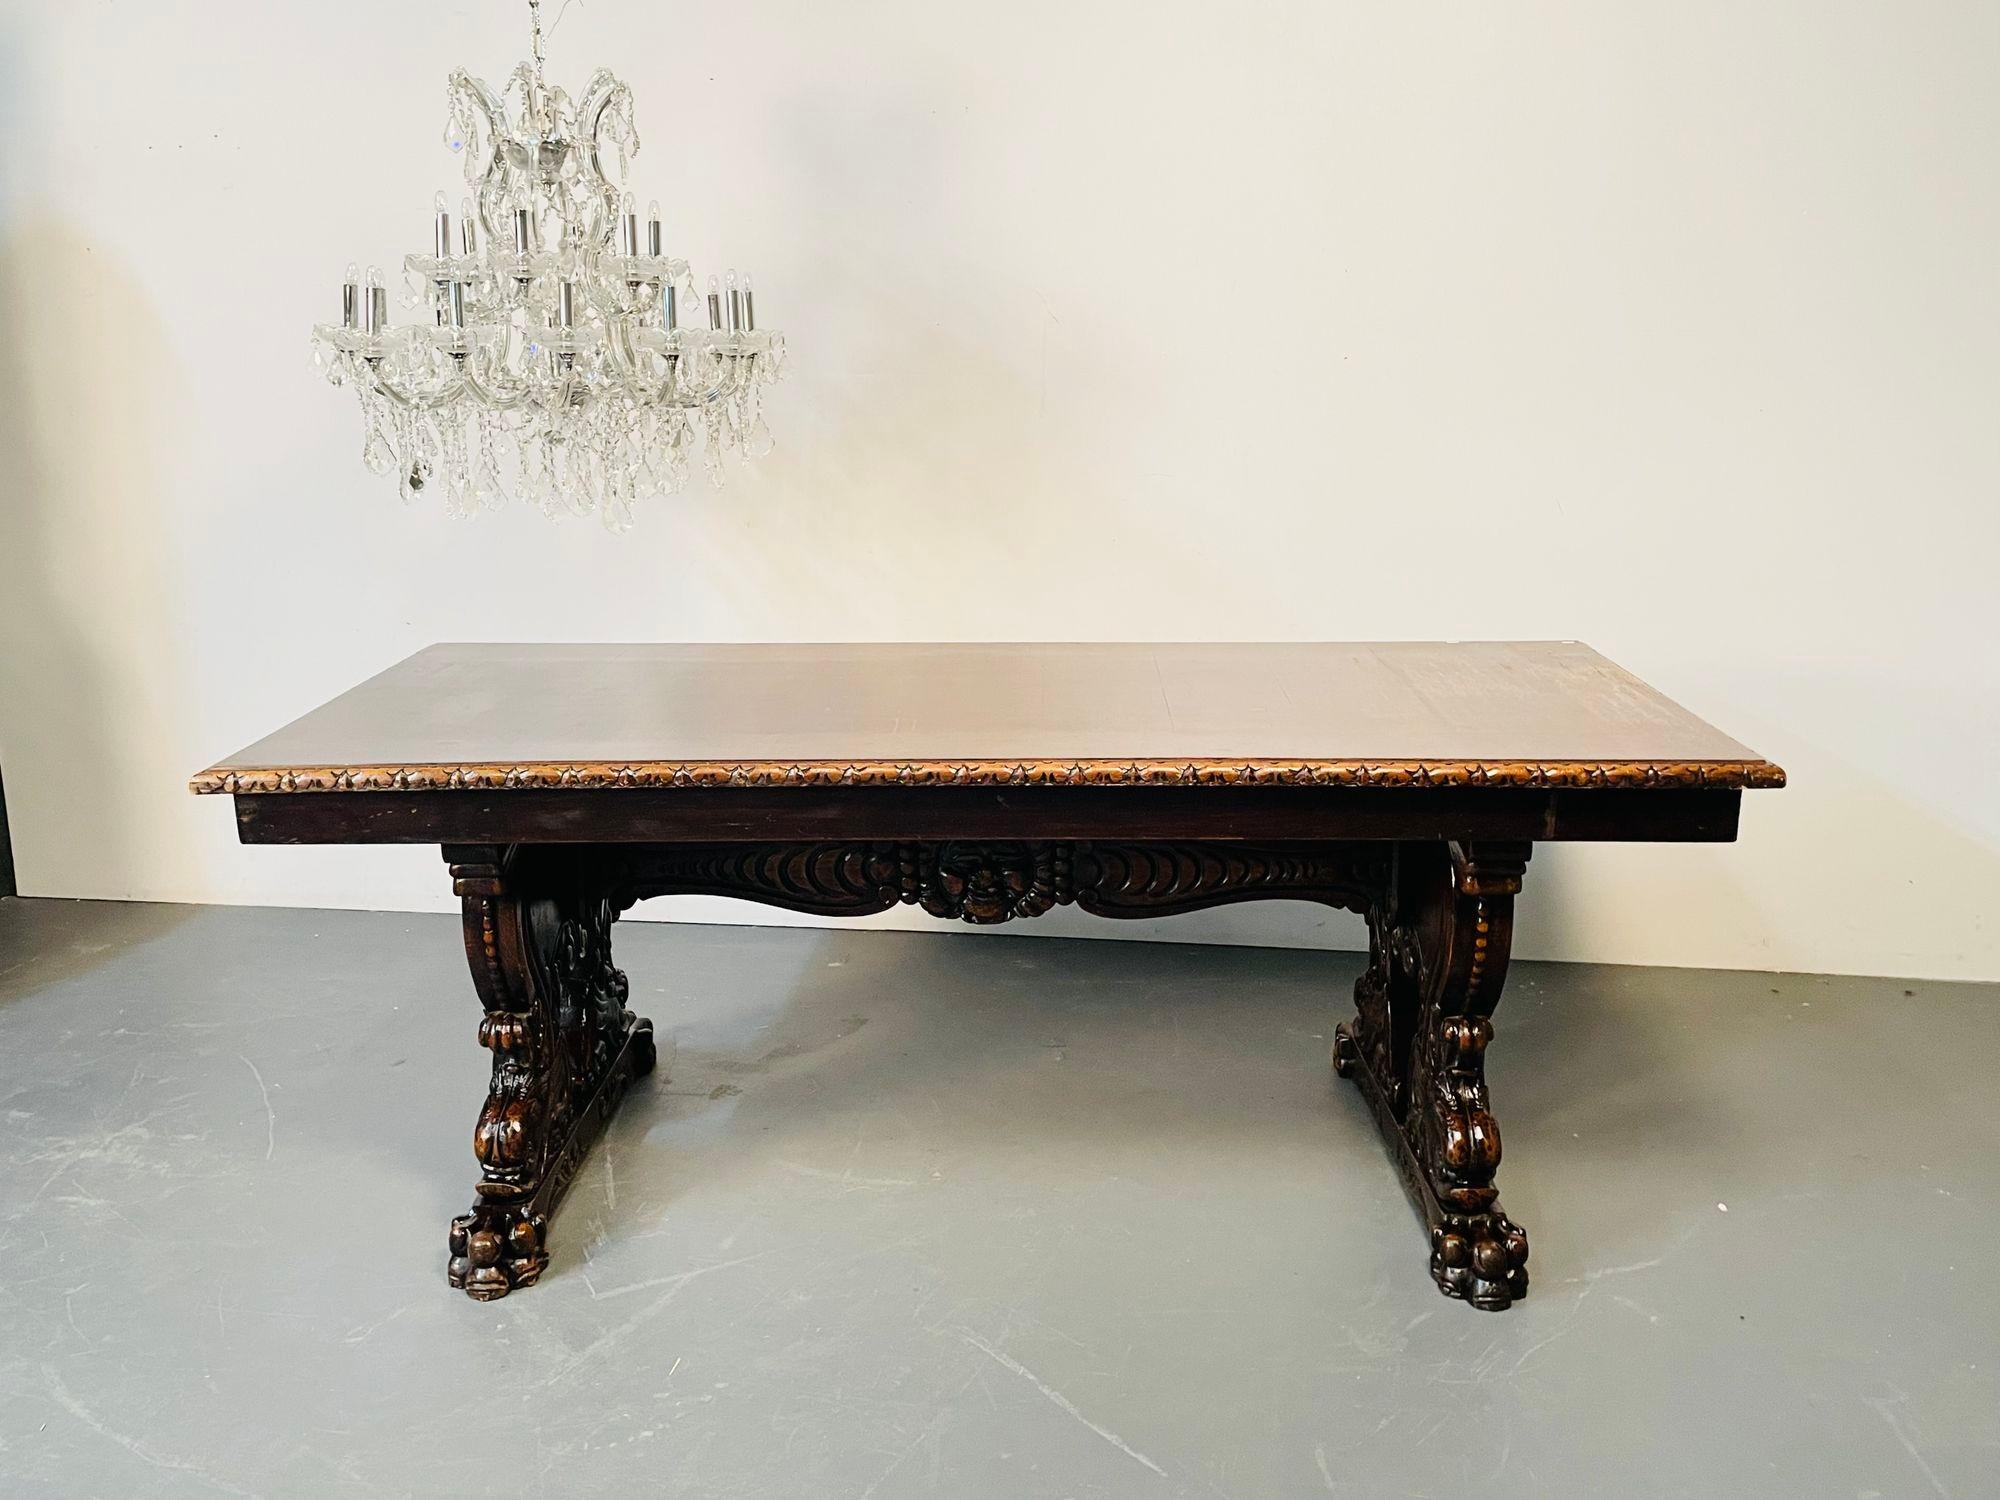 Renaissance Carved Dining, Center Table, Dolphin Claw Foot Base, 19th Century
A finely carved Renaissance Revival Heavily carved dining, center or library table. The scalloped edge table top while in need of restoration, still stunning sits atop a